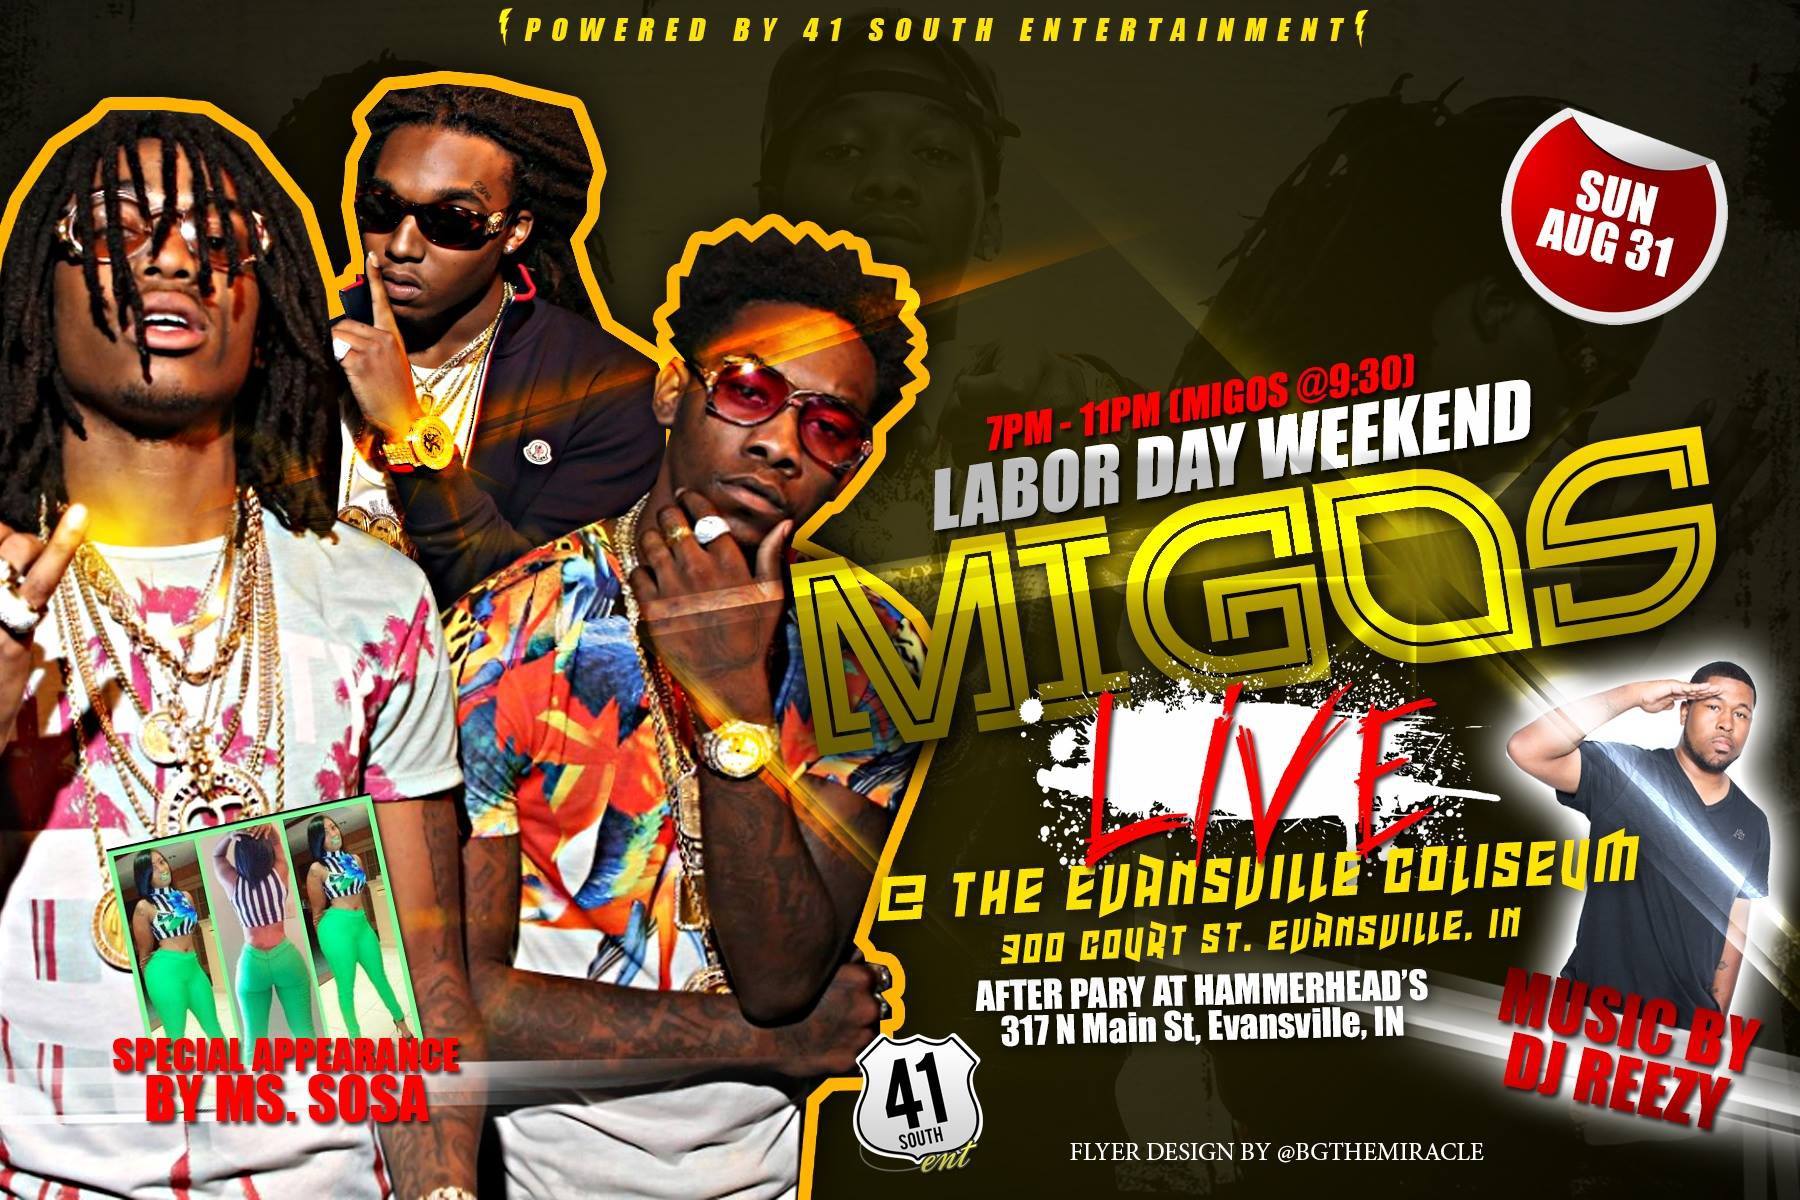 41-south-entertainment-migos-show-flyer-2014-evansville-in